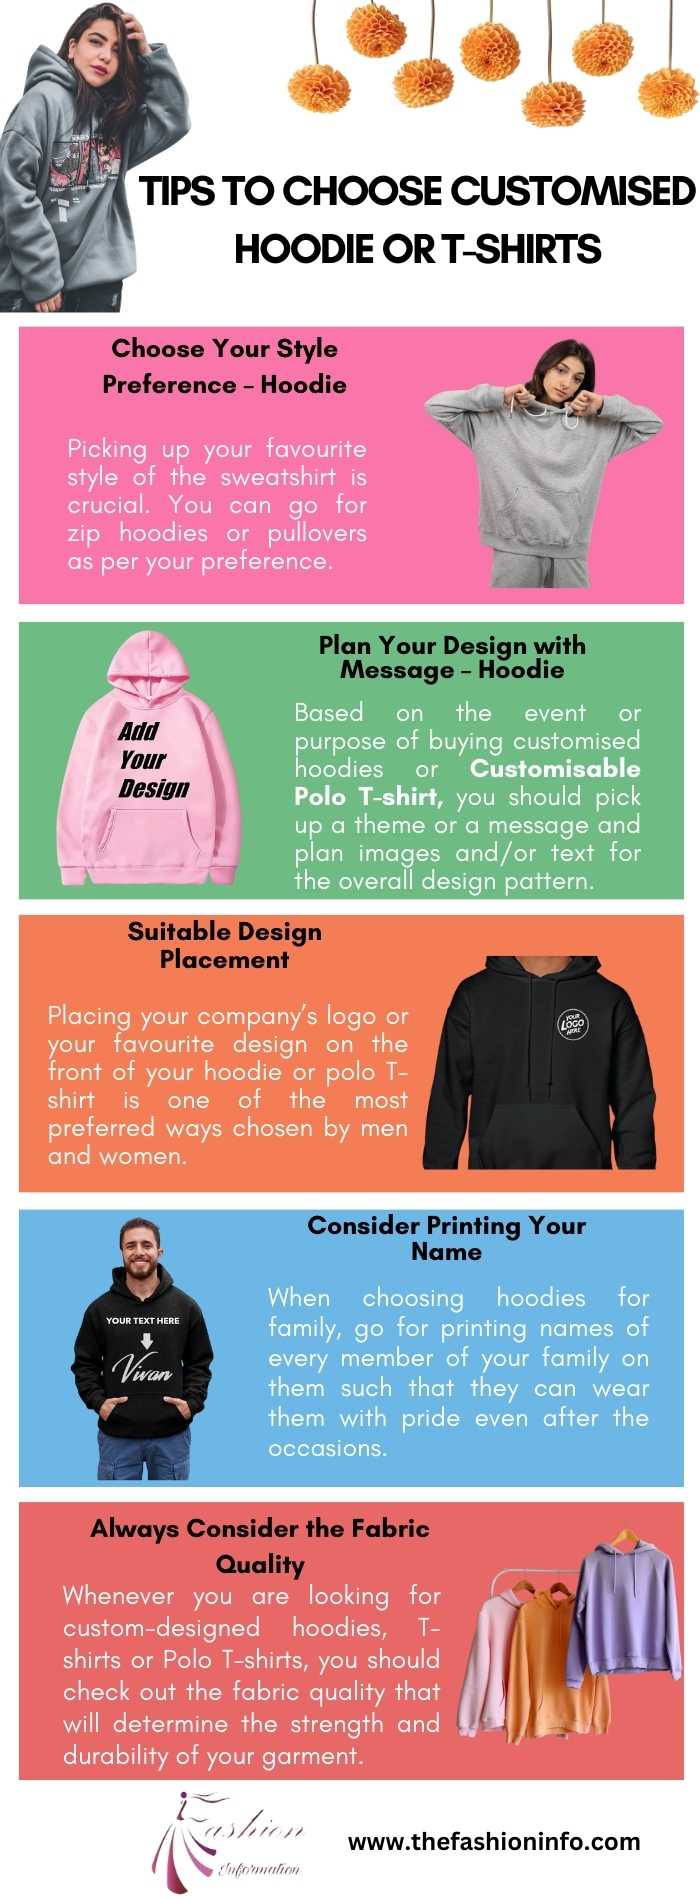 Tips to choose customised Hoodie or T-shirts